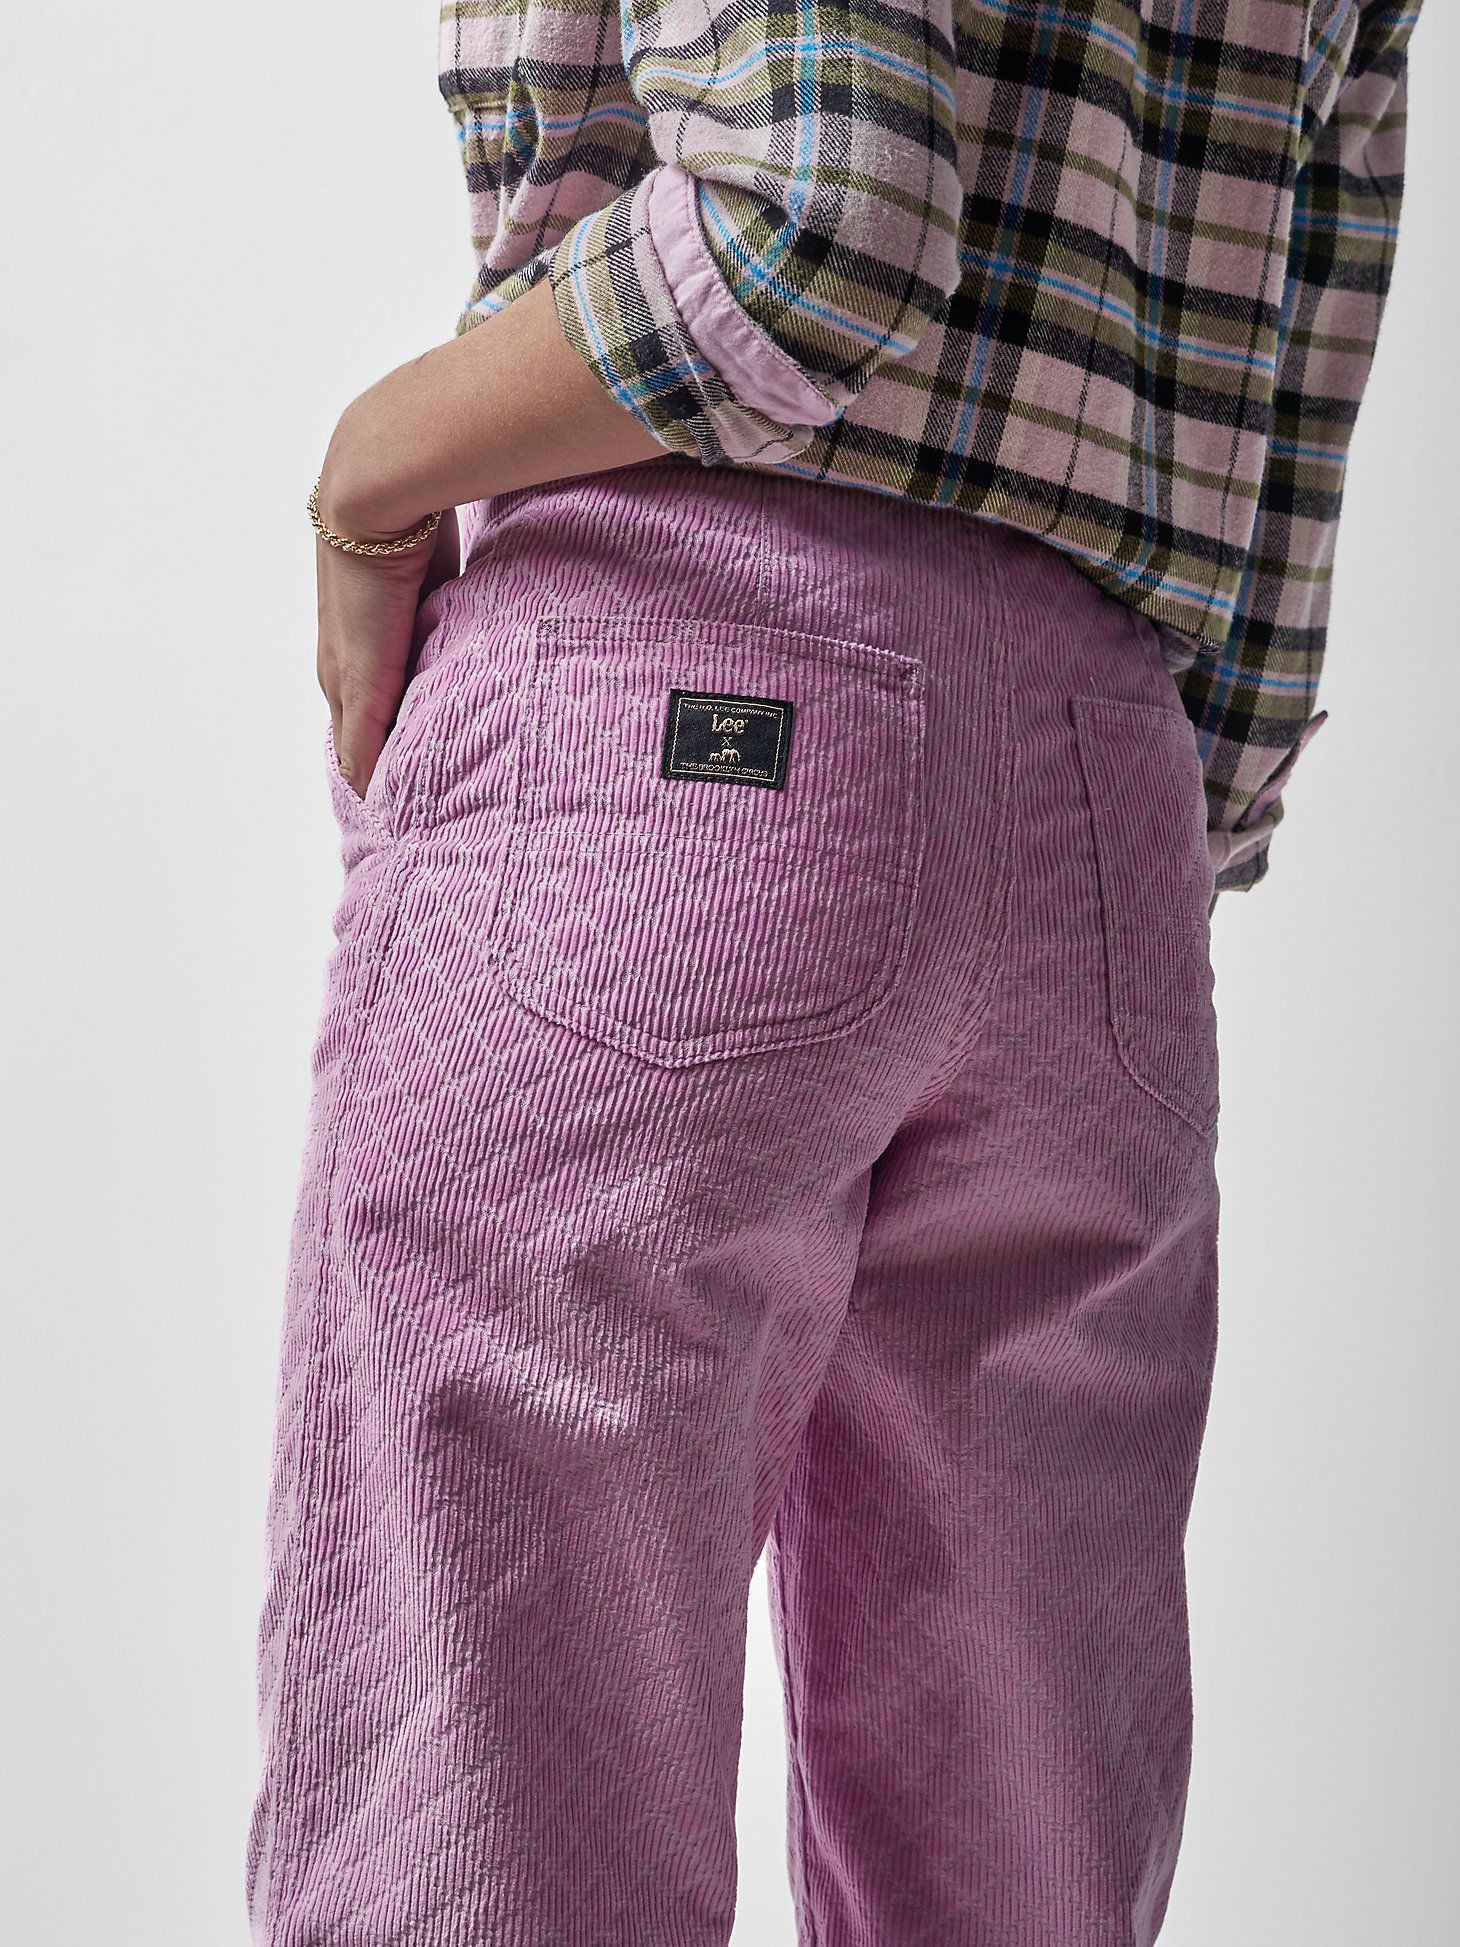 Women's Lee® x The Brooklyn Circus® Whizit Zip Corduroy Pant in Sugar Lilac alternative view 5